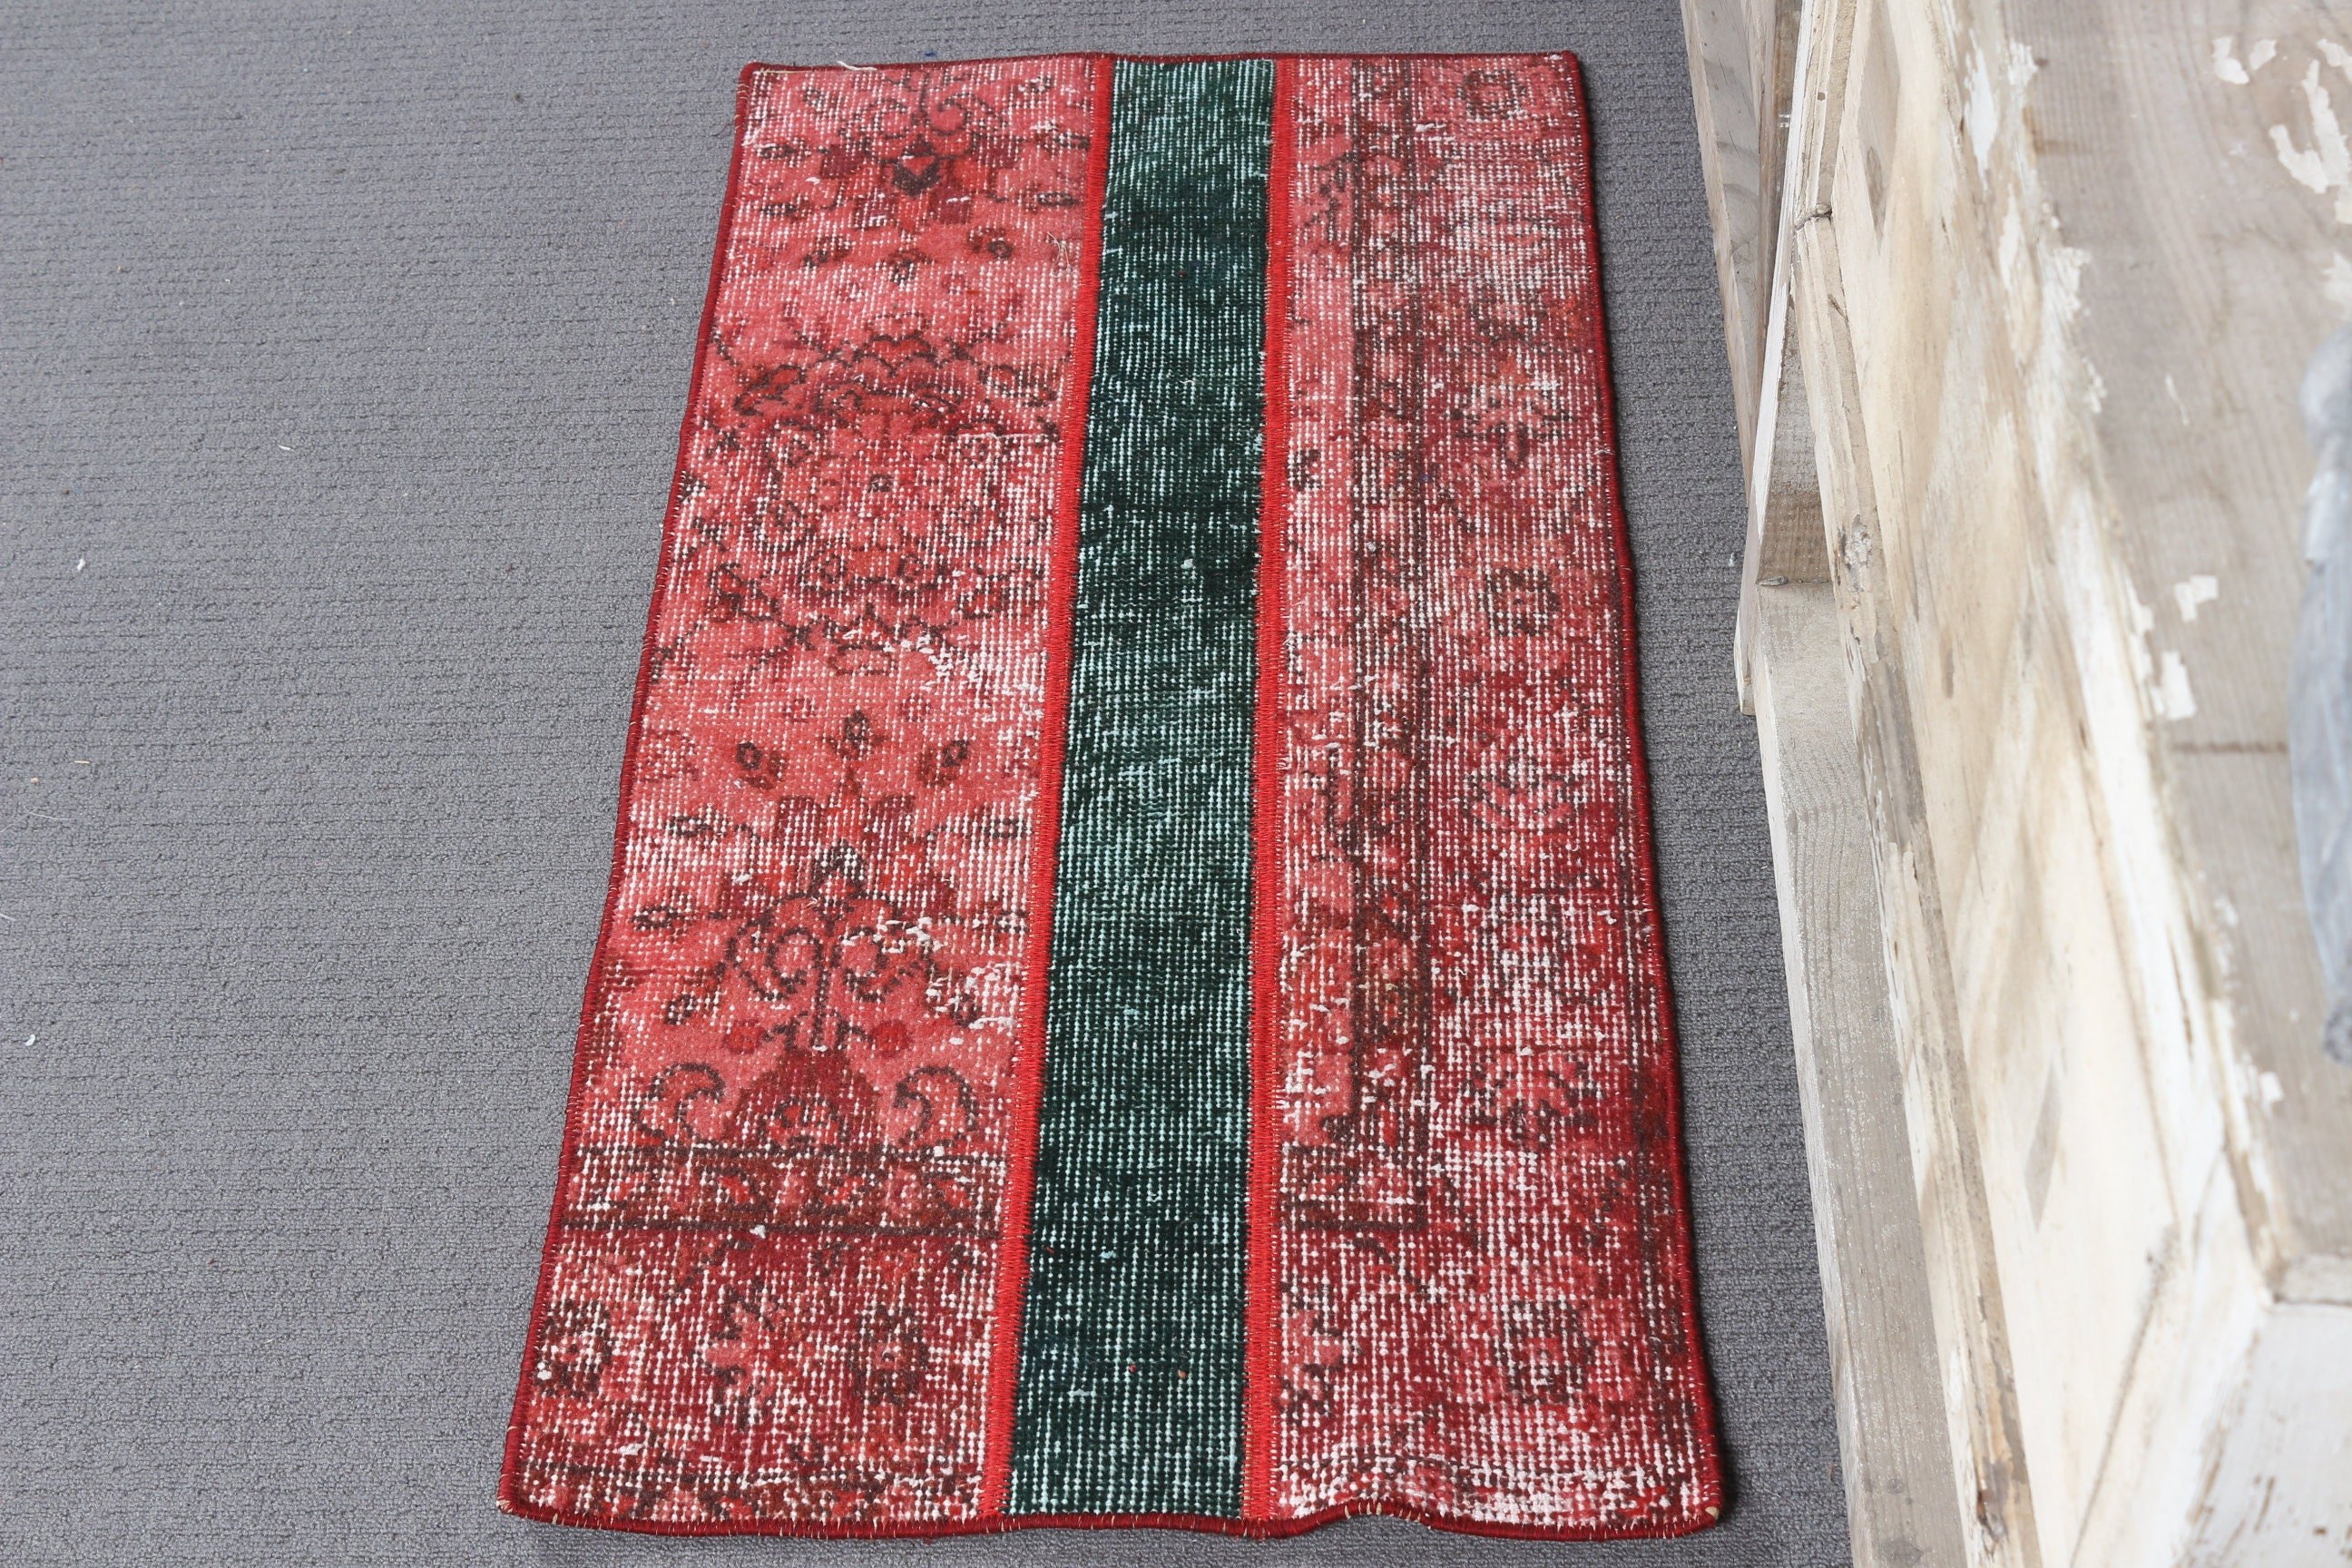 Oushak Rugs, Vintage Rug, Red Cool Rugs, Turkish Rugs, 1.6x3.2 ft Small Rug, Aztec Rugs, Car Mat Rug, Wool Rug, Rugs for Bath, Kitchen Rug